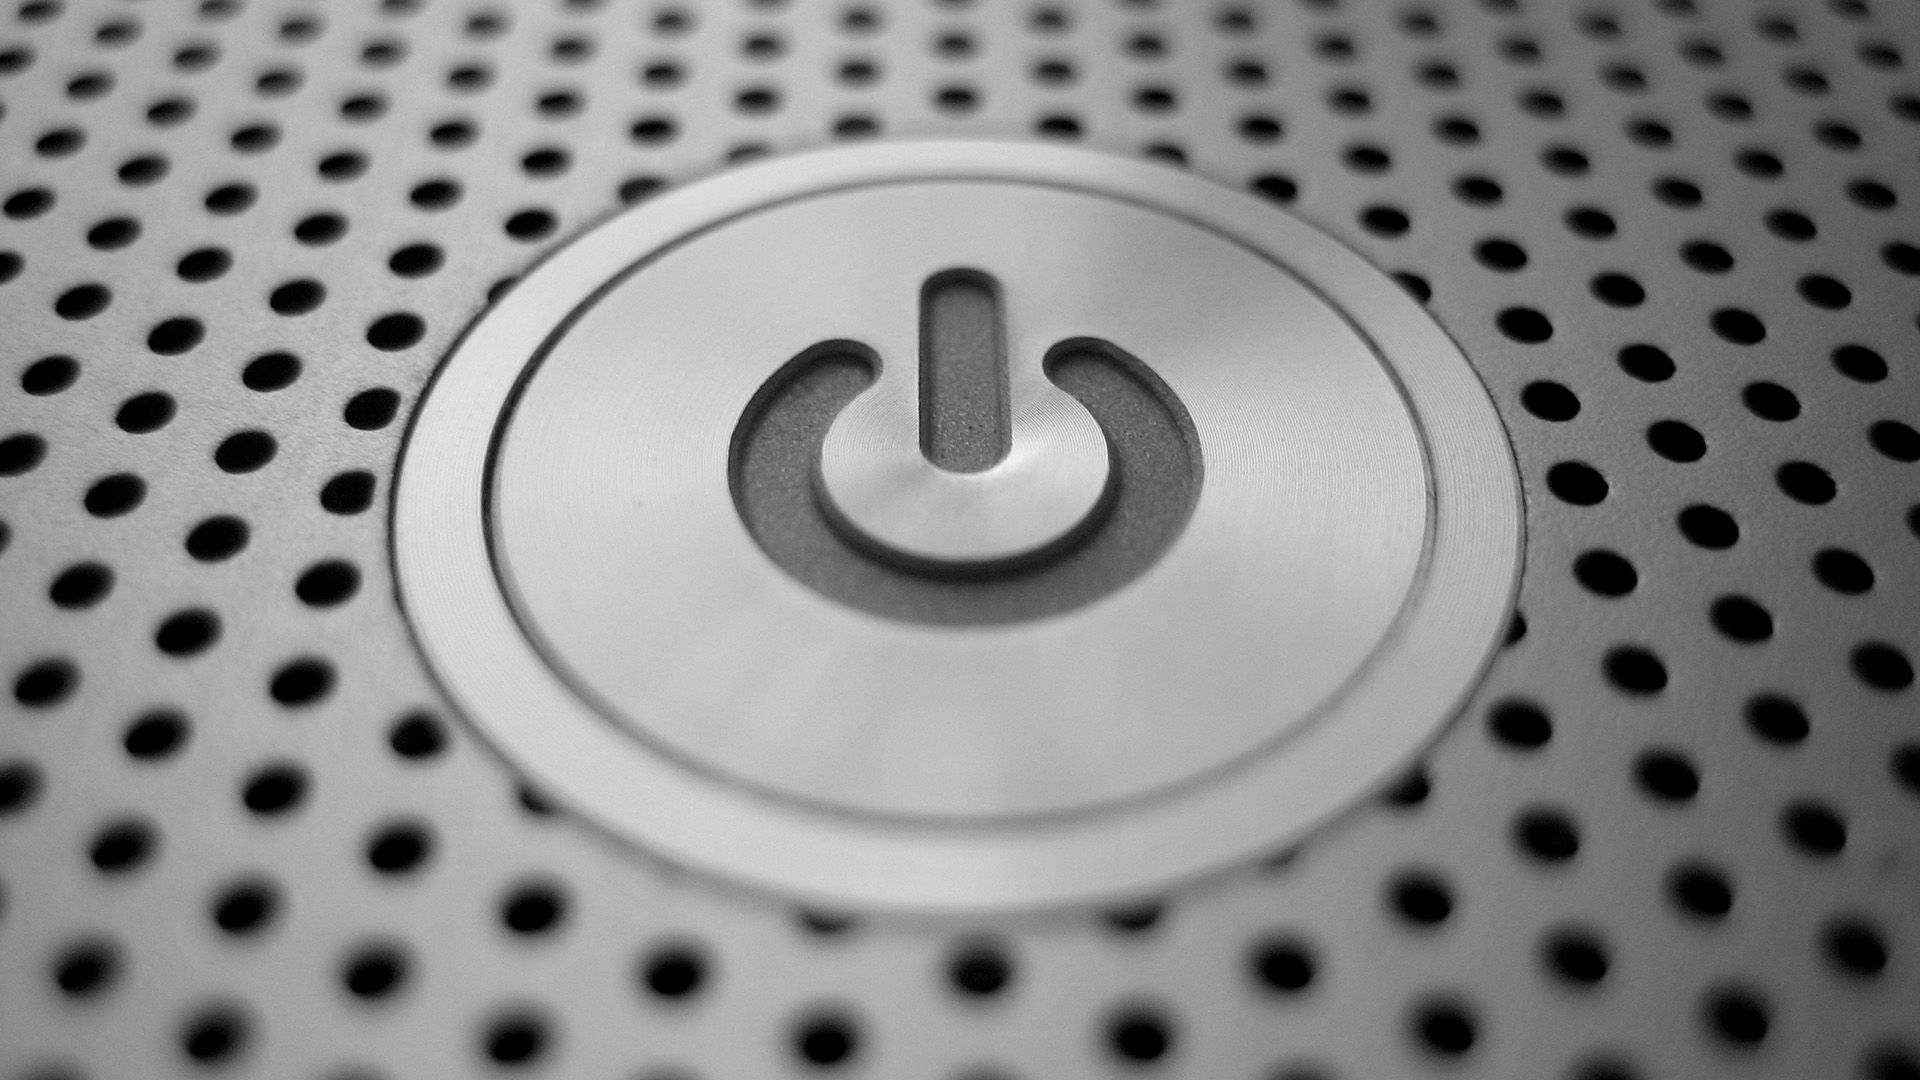 Power Button Wallpapers Images Photos Pictures Backgrounds